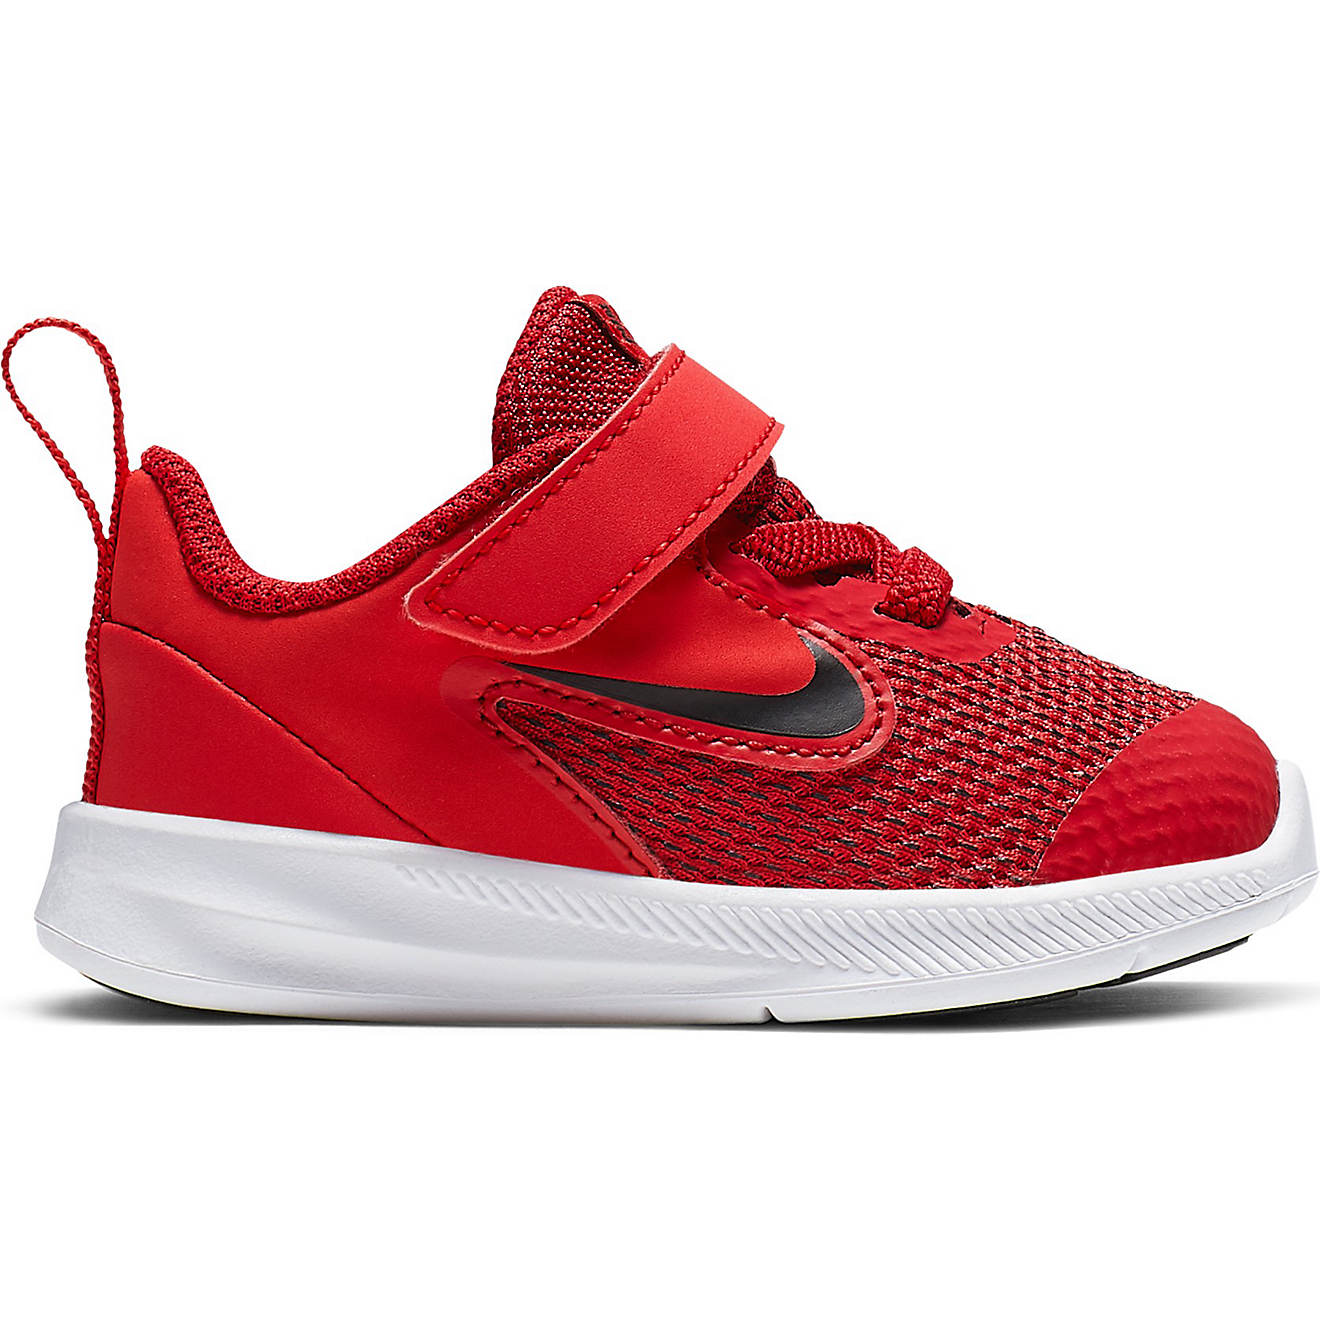 Nike Toddlers' Downshifter 9 Shoes | Academy